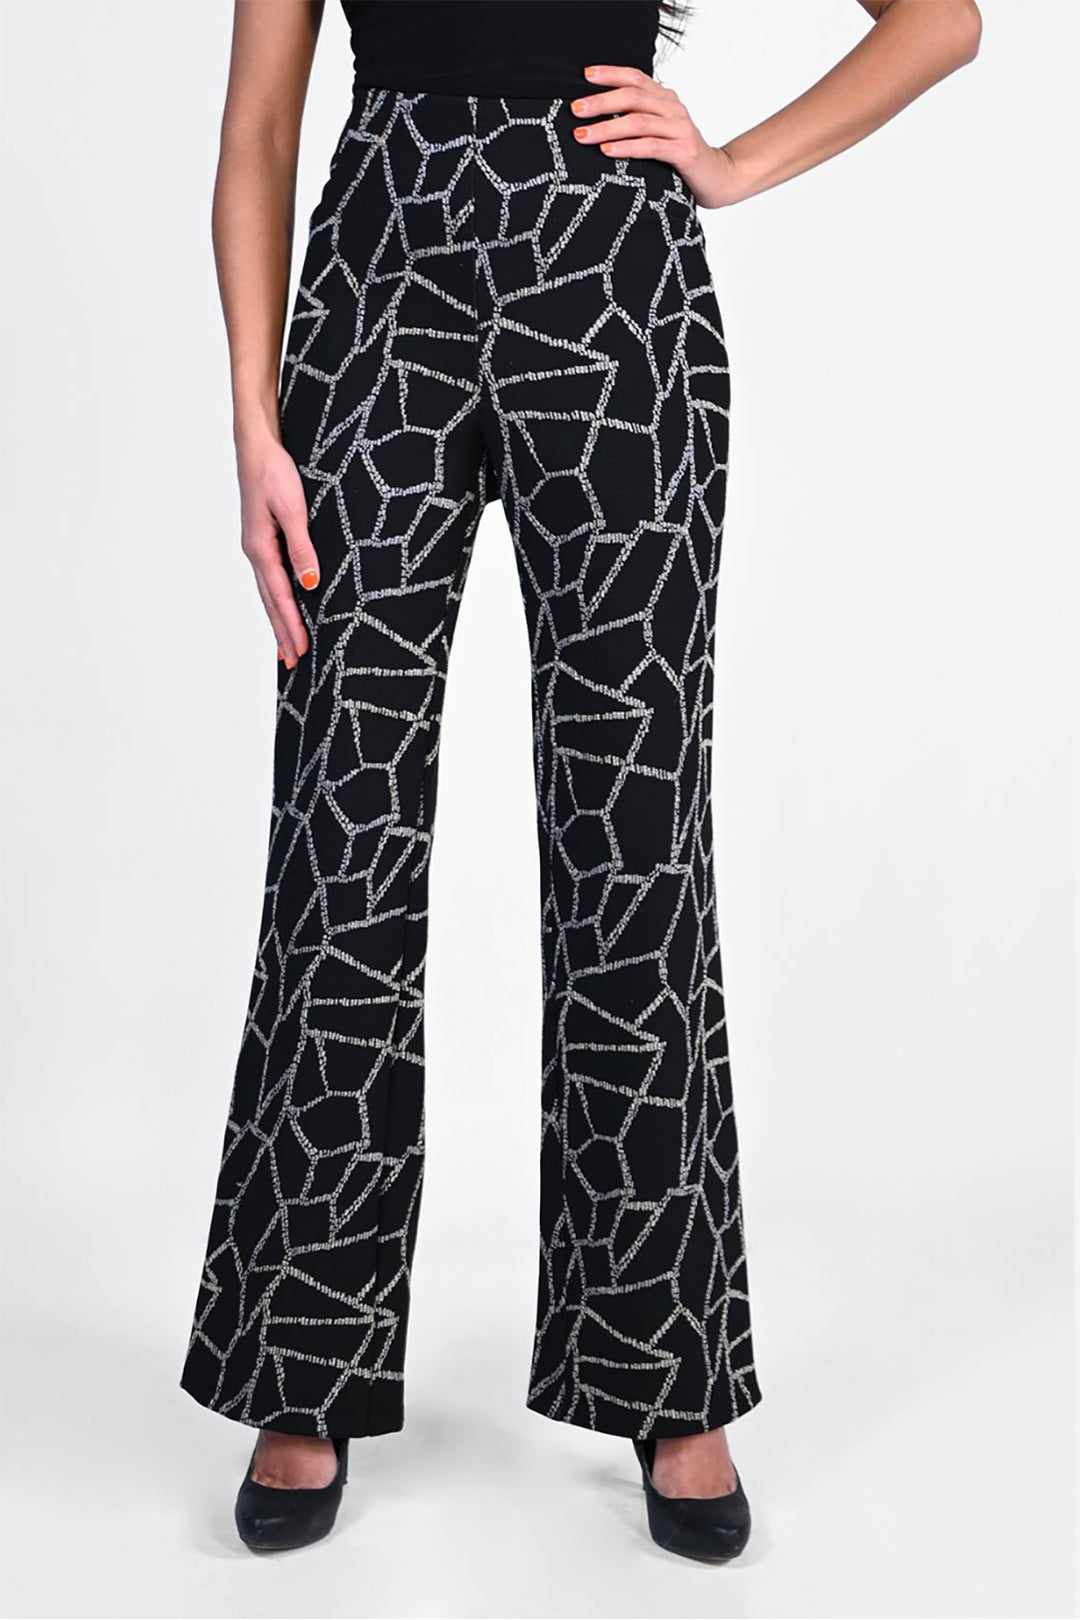 Katy Pants in beautiful Black & Gold  by Frank Lyman are a Woven Pant that feature a wide leg cut with front pockets, providing comfort and stretch, these pants are guaranteed to be a staple in your wardrobe.